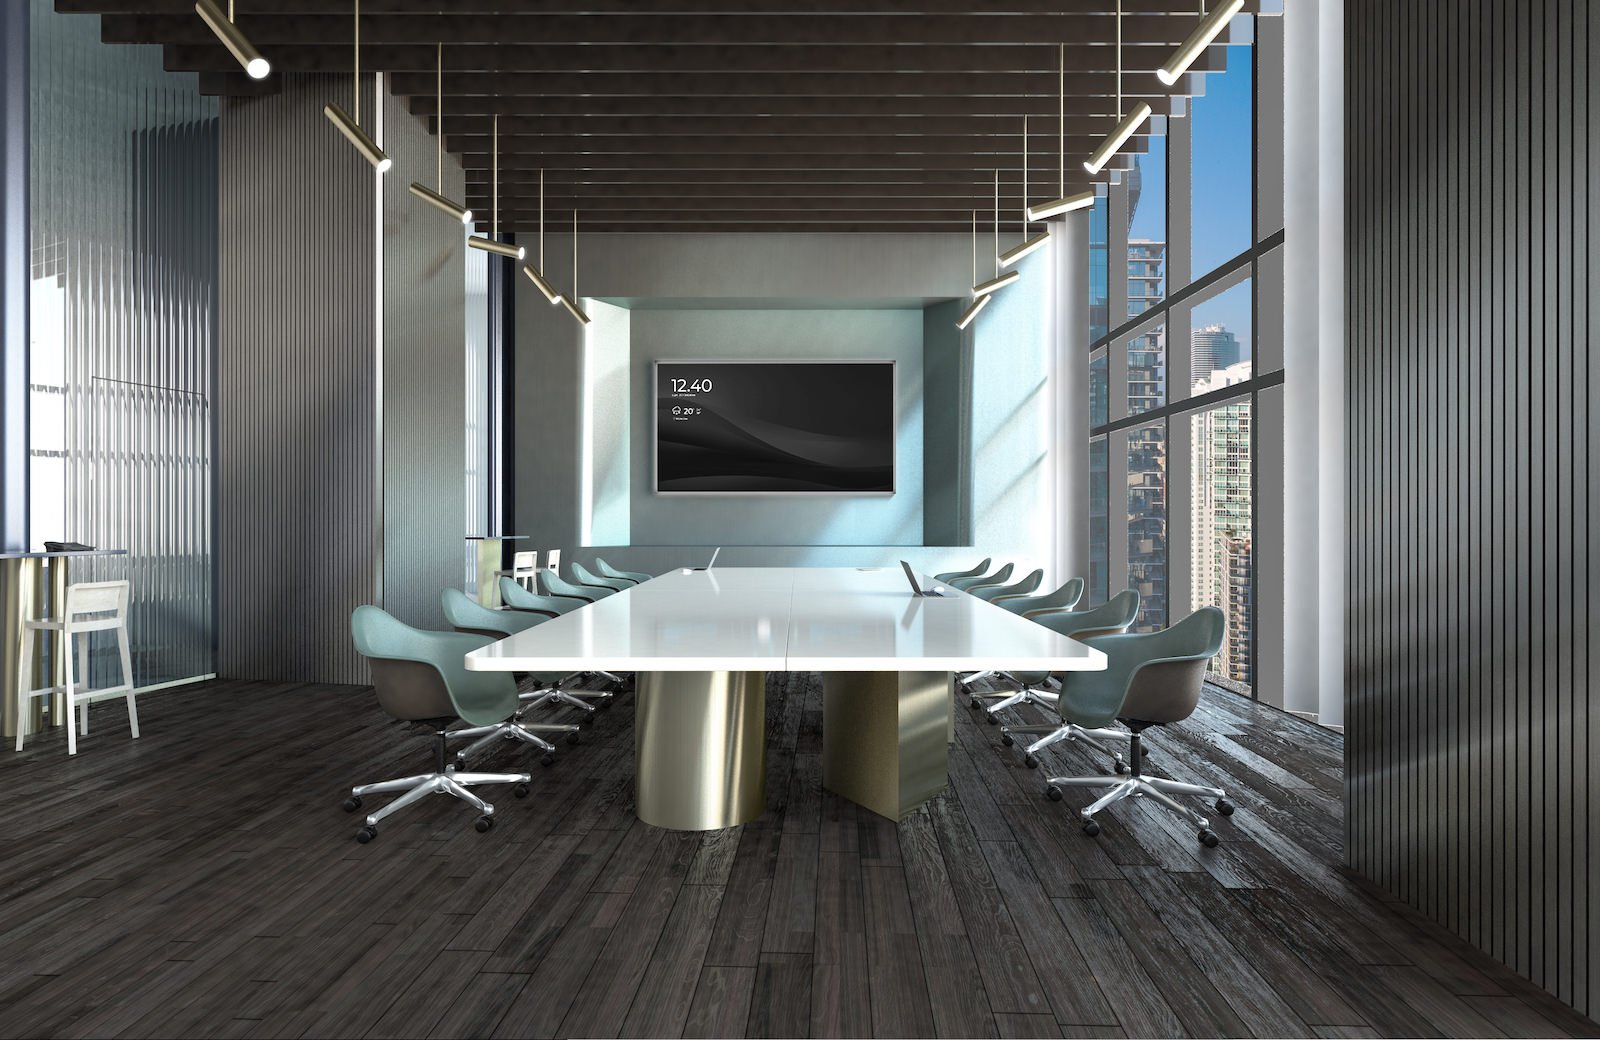 A boardroom in the incredible 830 Brickell Project by turkish contractor Ant Yapi